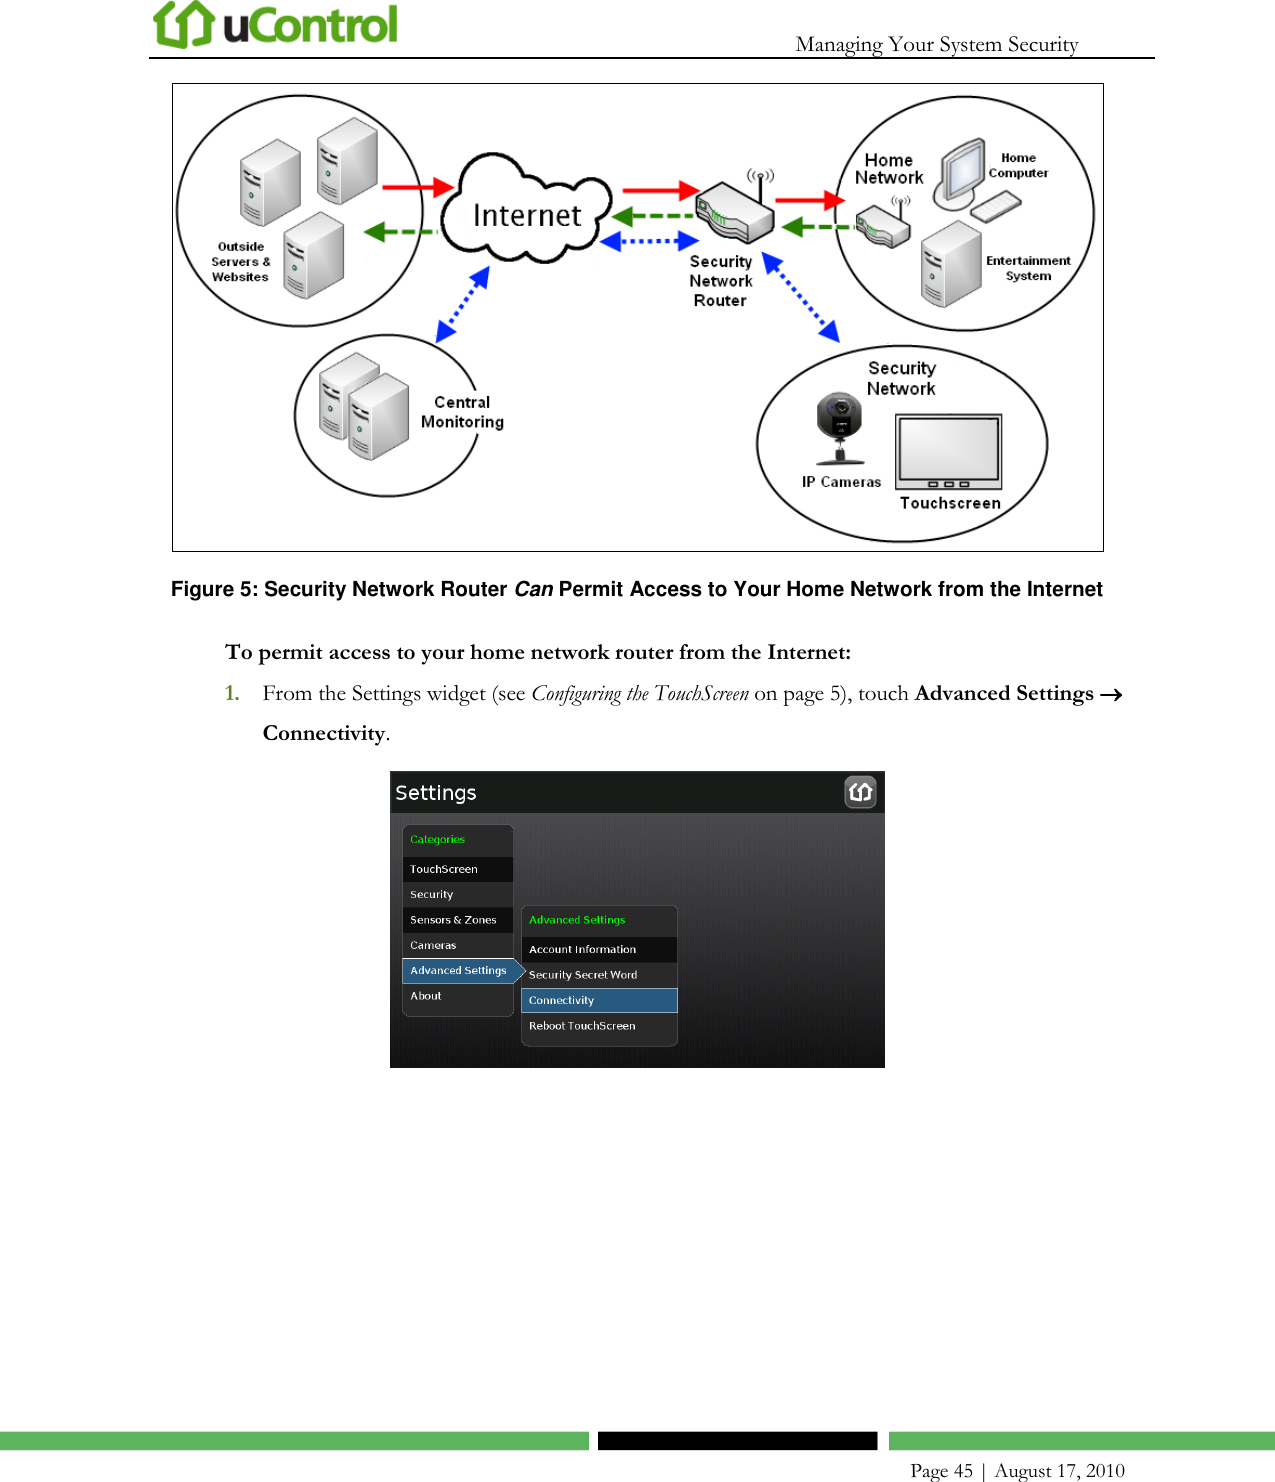   Managing Your System Security    Page 45 | August 17, 2010  Figure 5: Security Network Router Can Permit Access to Your Home Network from the Internet To permit access to your home network router from the Internet: 1. From the Settings widget (see Configuring the TouchScreen on page 5), touch Advanced Settings  Connectivity.  